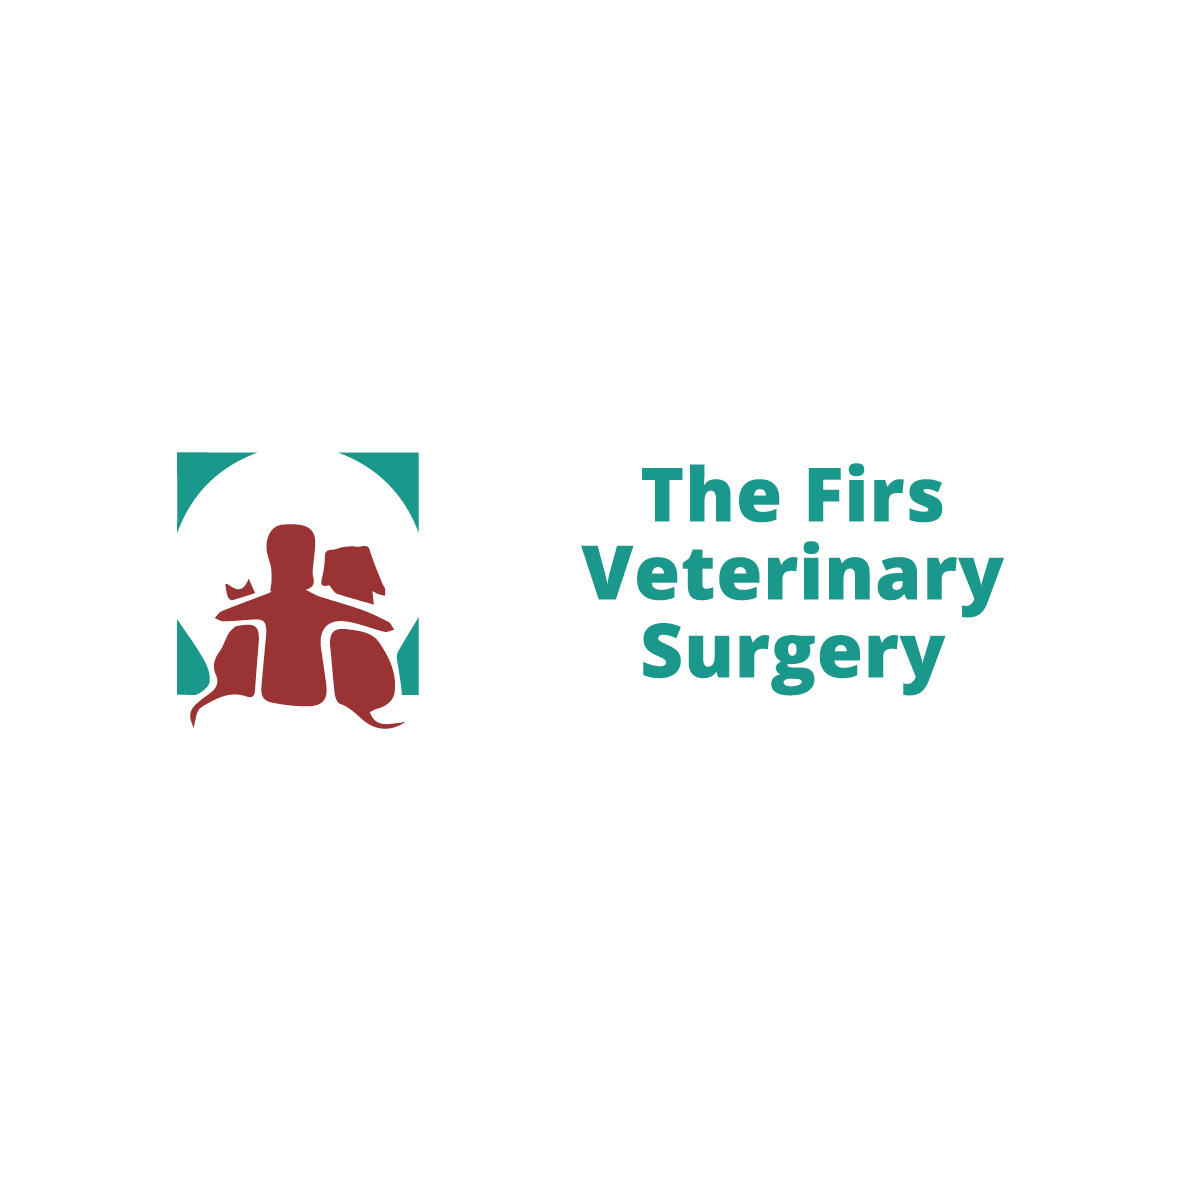 Willows Veterinary Group - The Firs Veterinary Surgery Logo